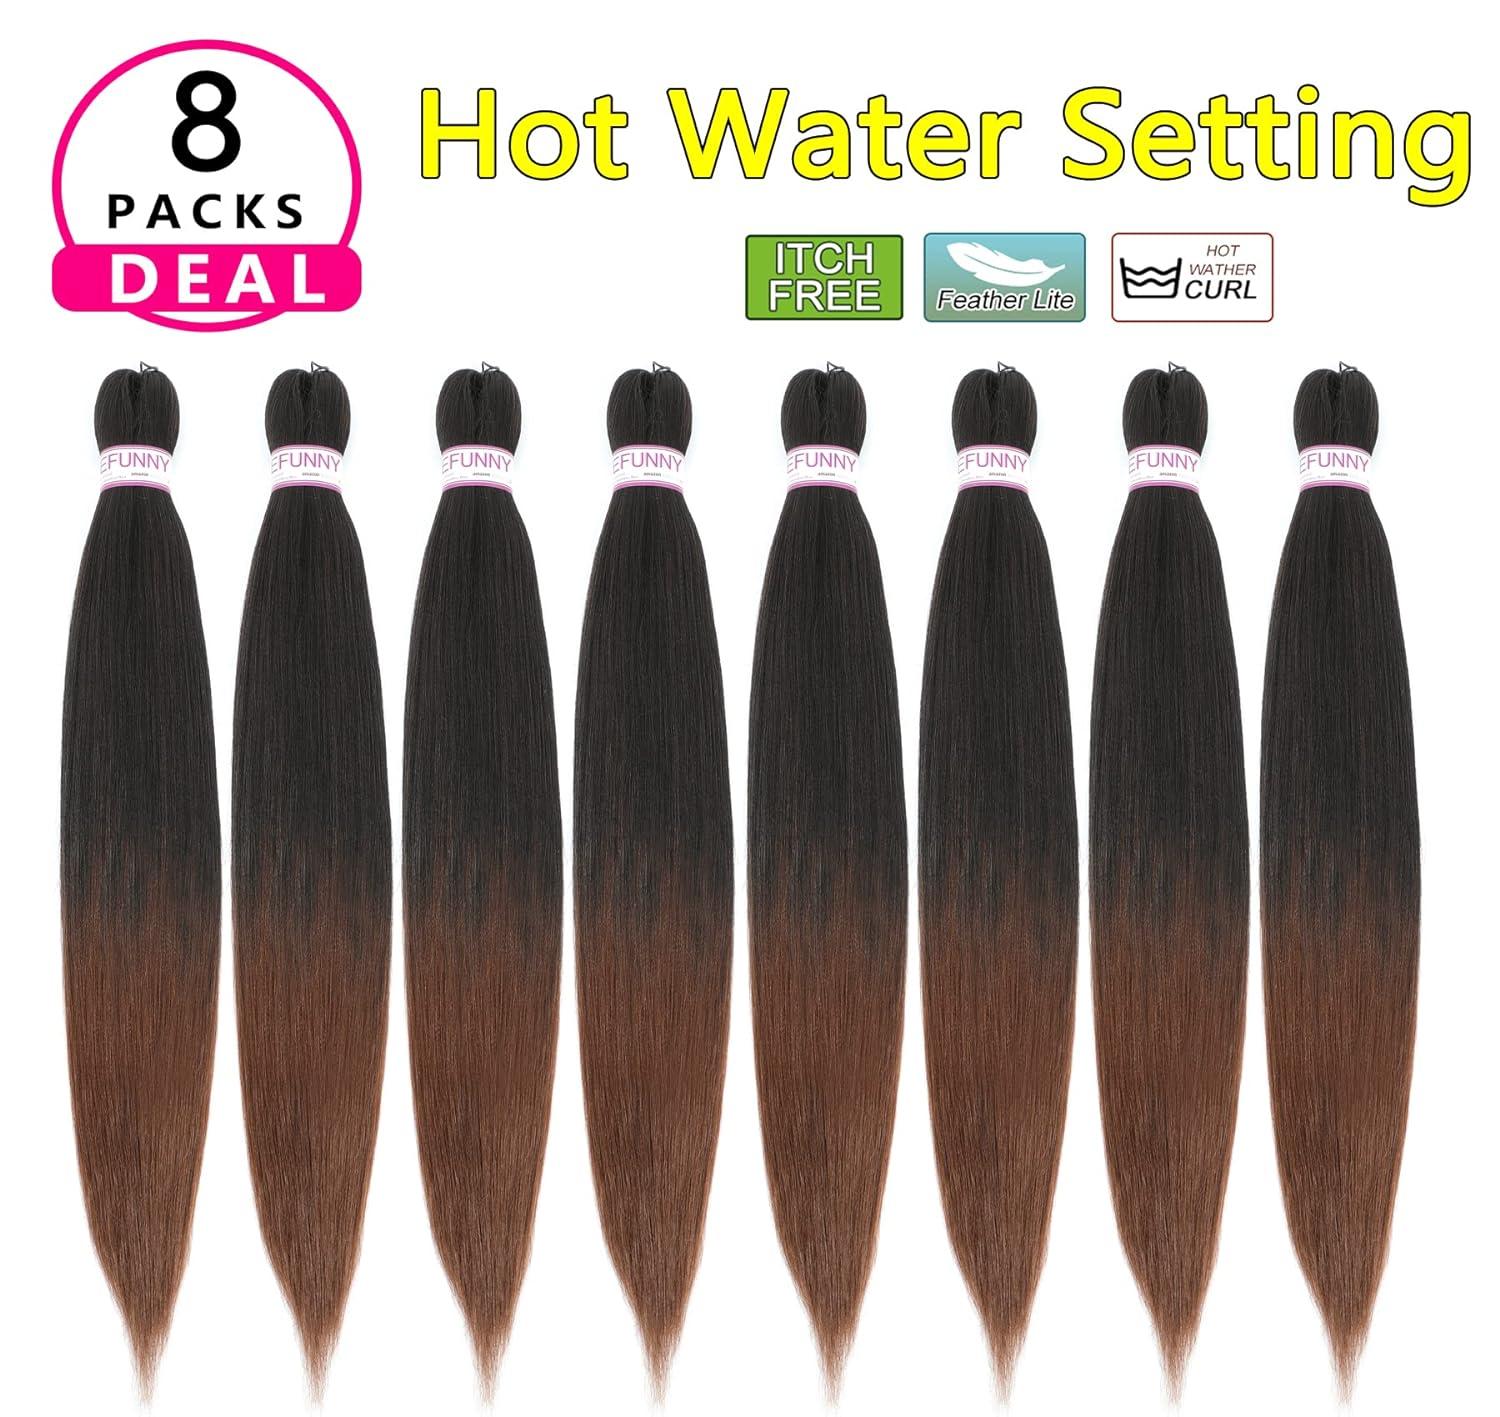 Braiding Hair Pre Stretched Long Pre Stretched Braiding Hair Extensions  Braiding Hair Pre Stretched 16 Inch 8 Packs Synthetic Braiding Hair  Extensions